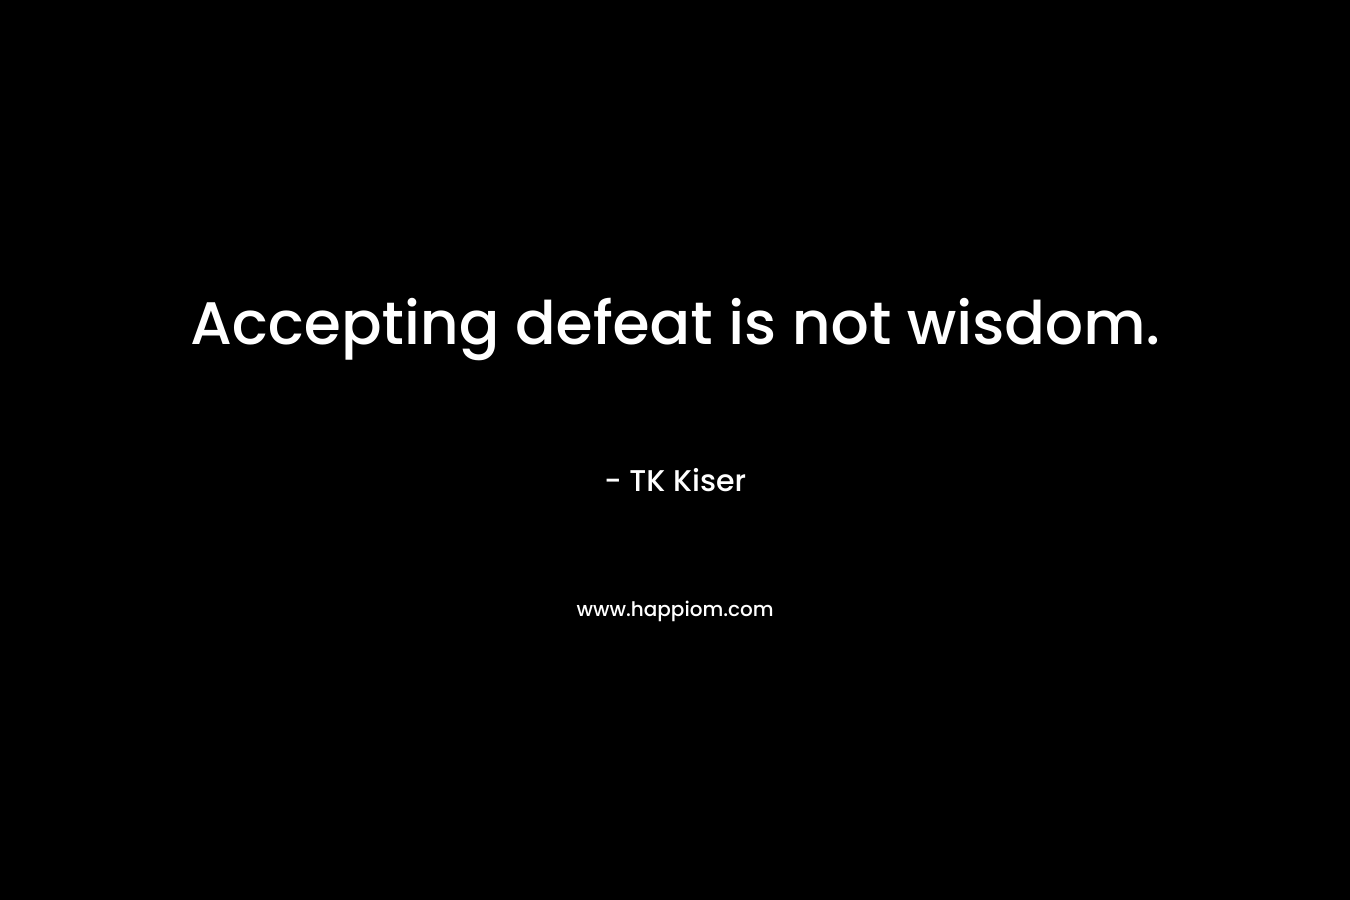 Accepting defeat is not wisdom.